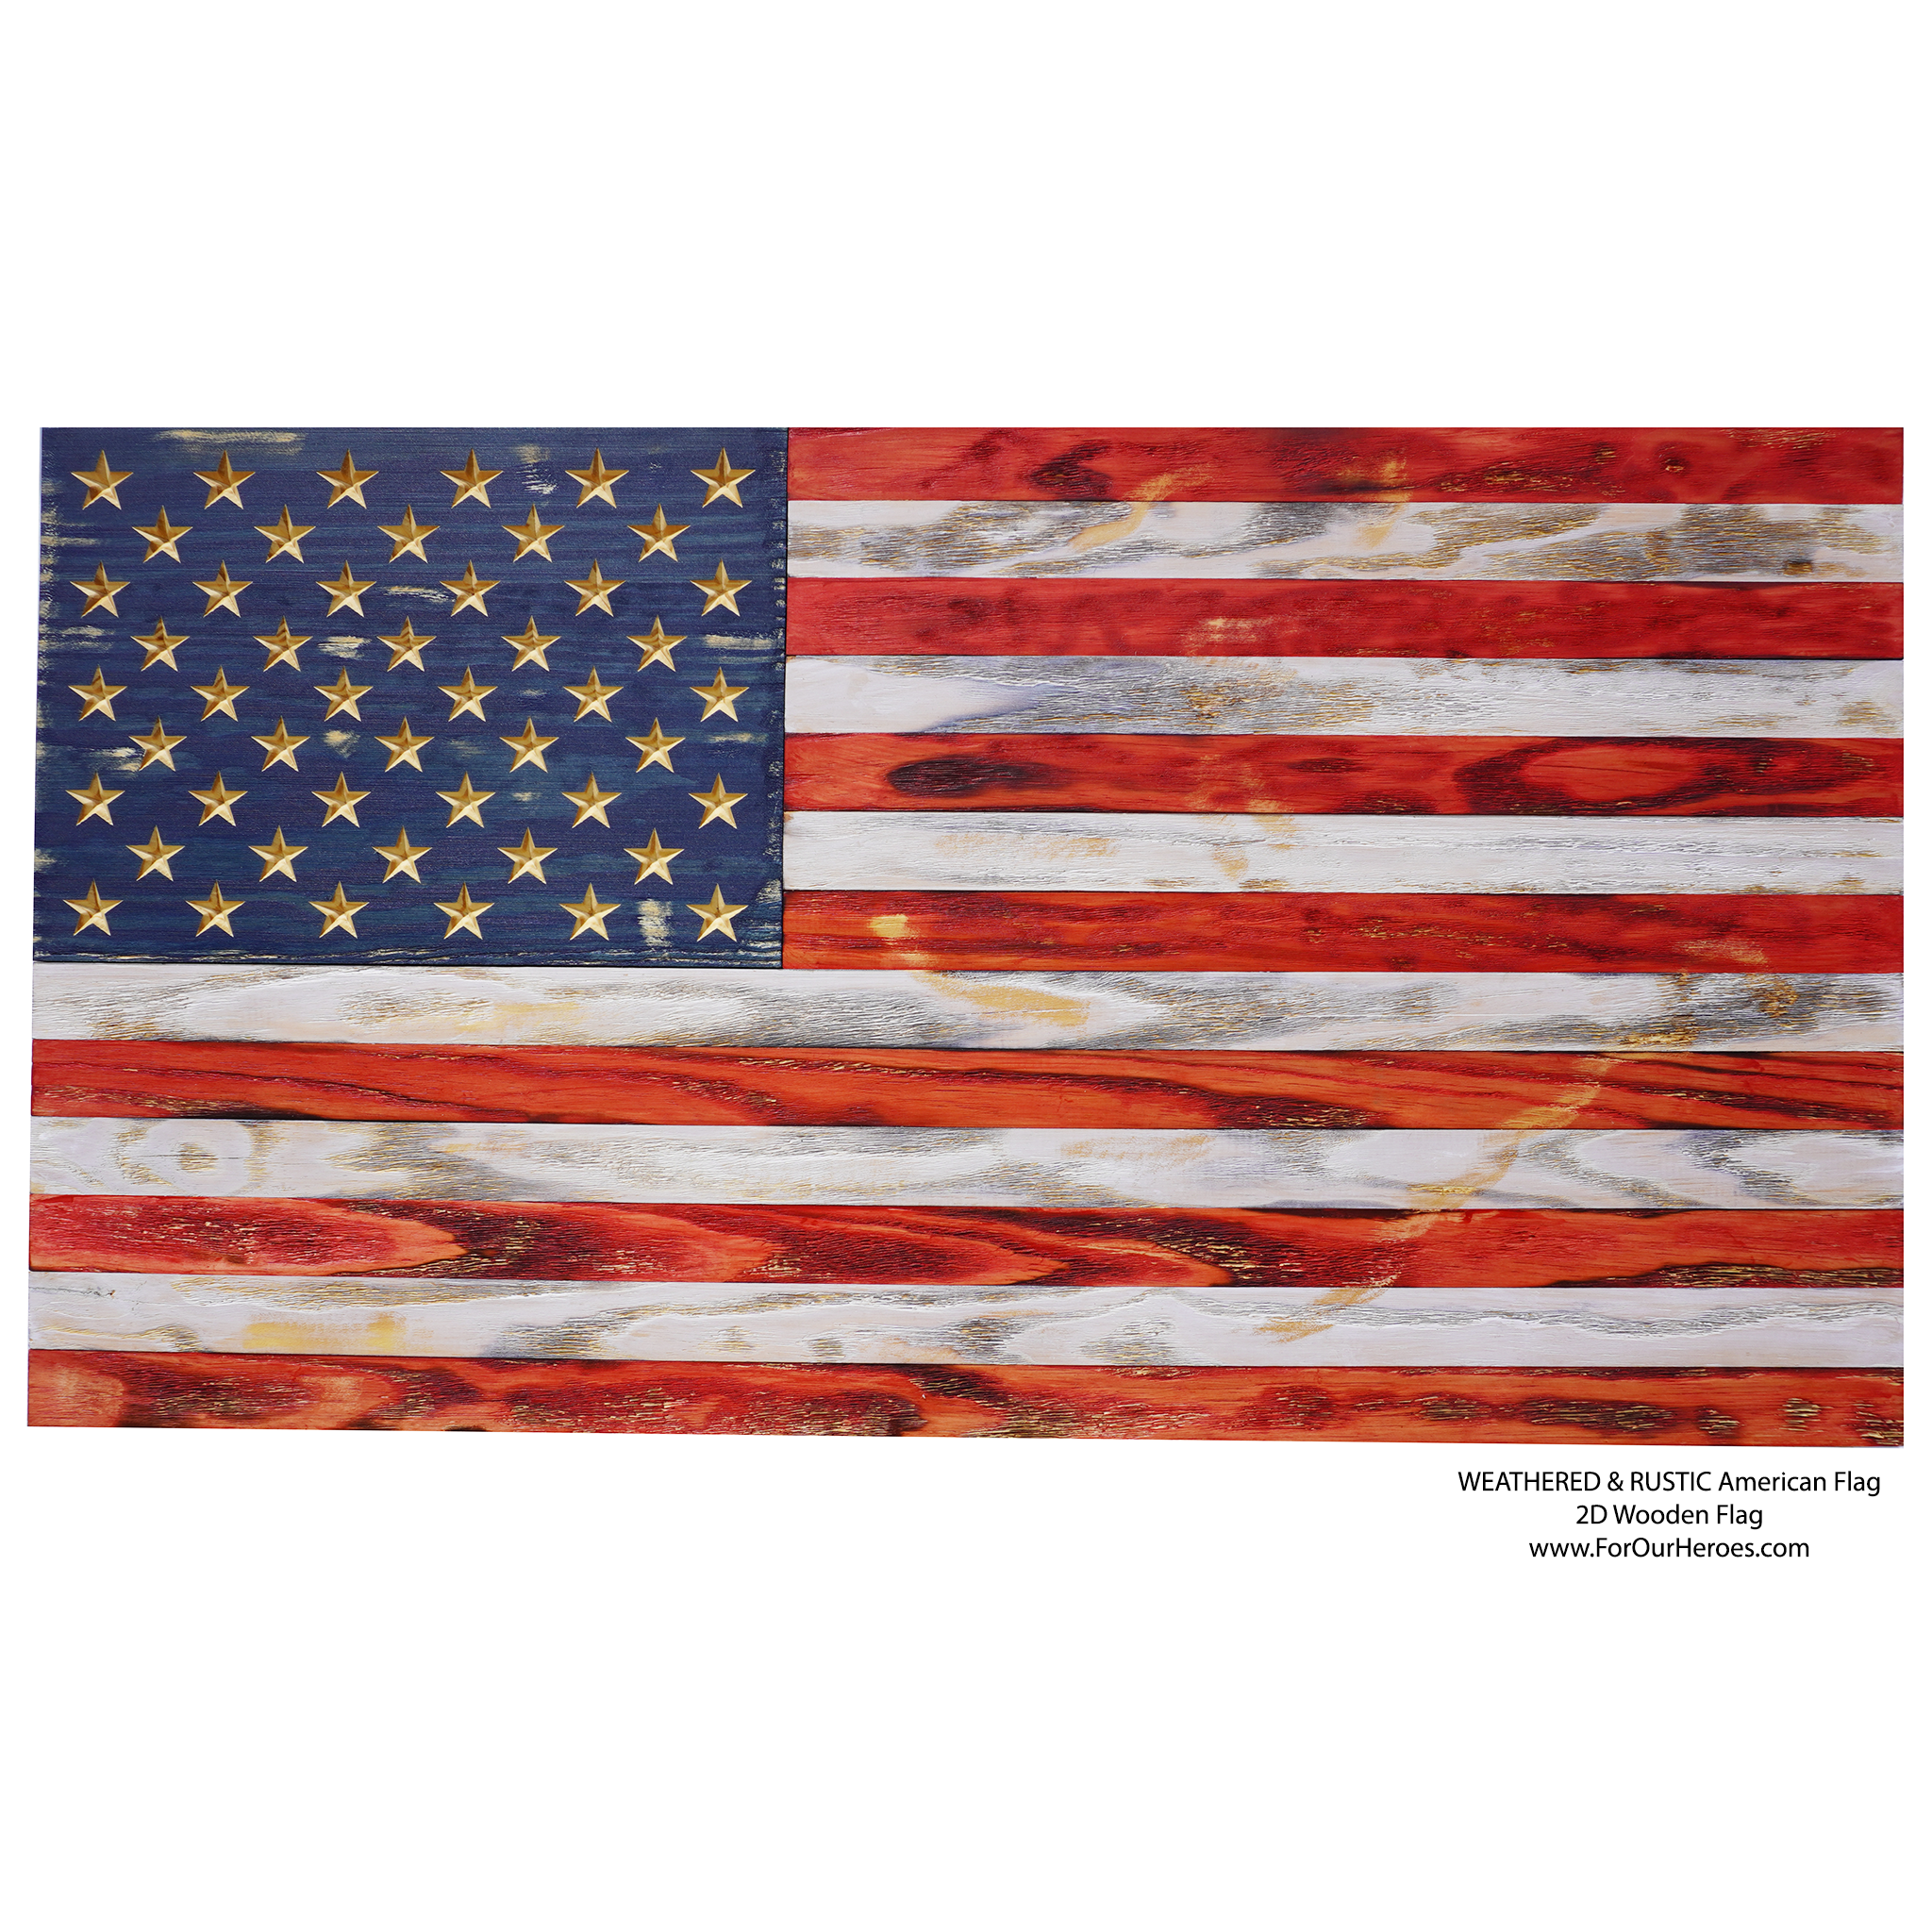 2D WEATHERED & RUSTIC American Flag - 0